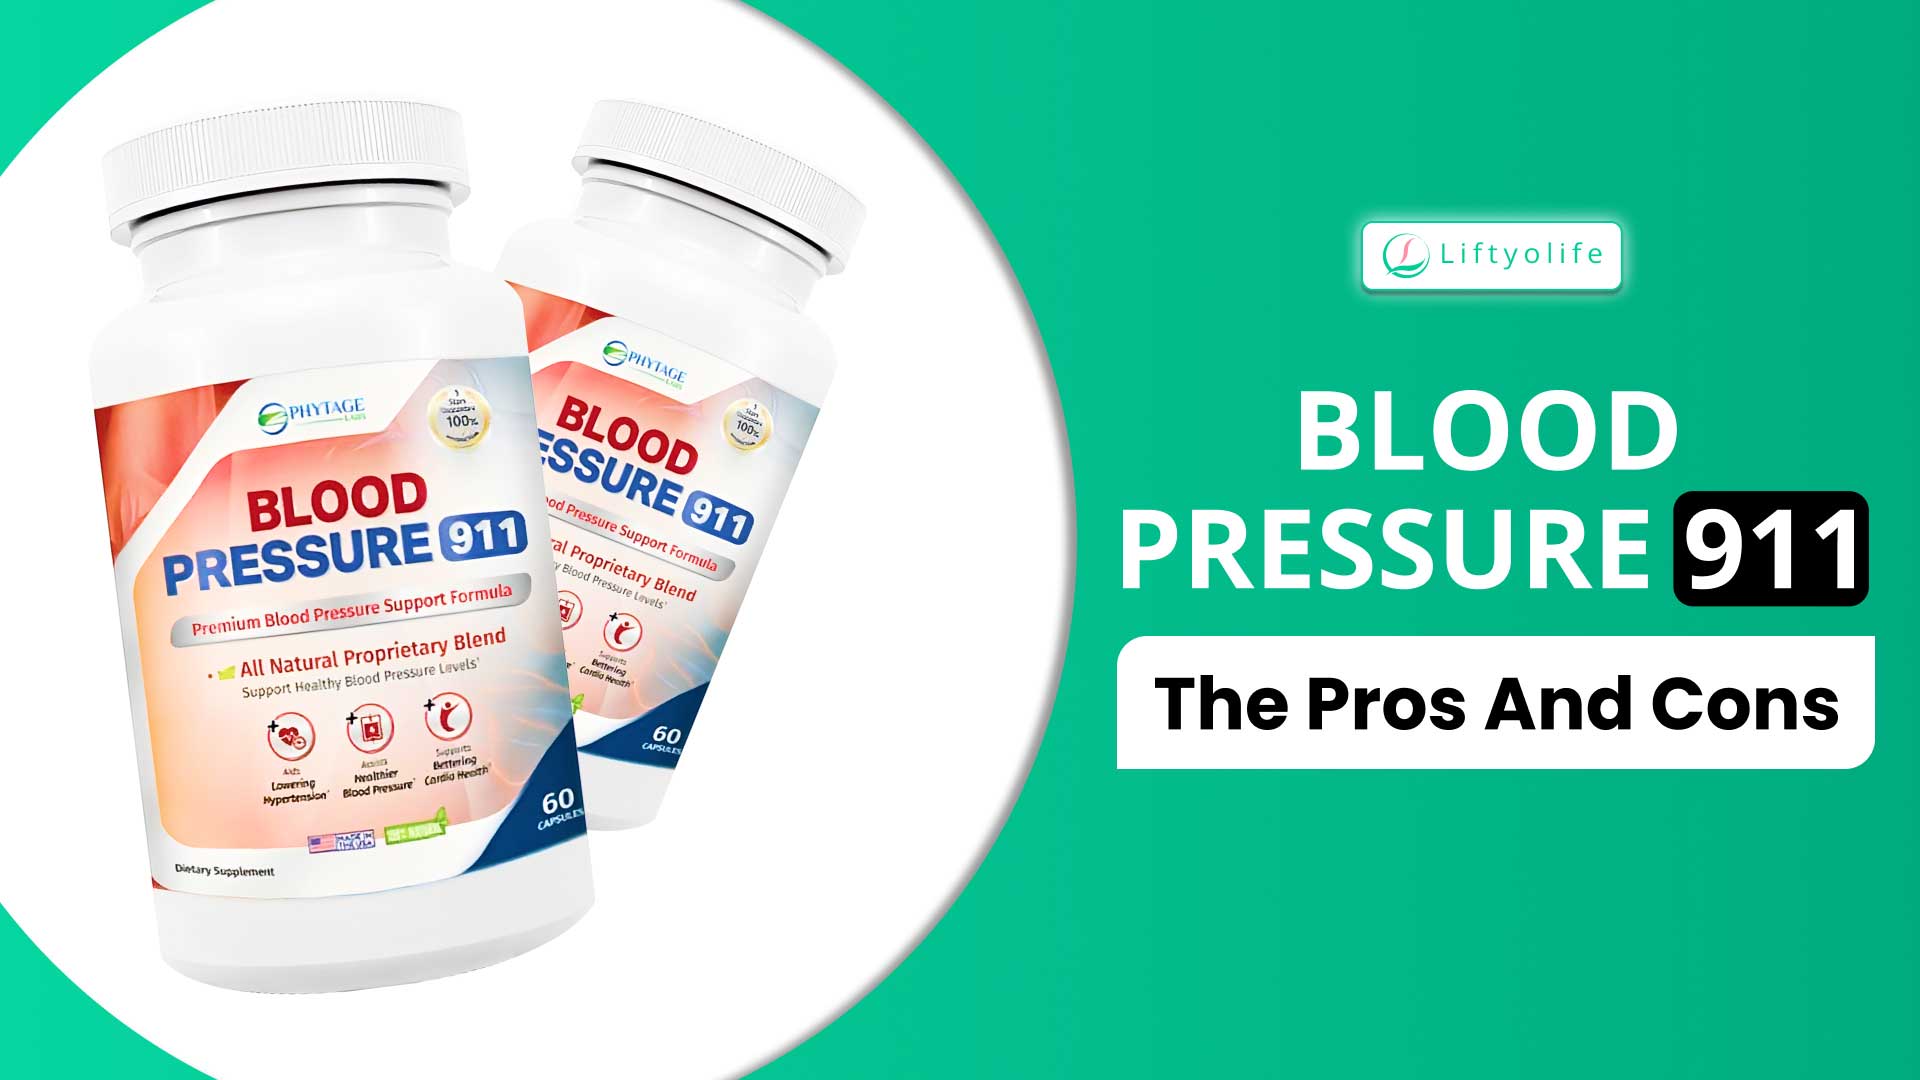 Blood Pressure 911 Reviews: The Pros And Cons